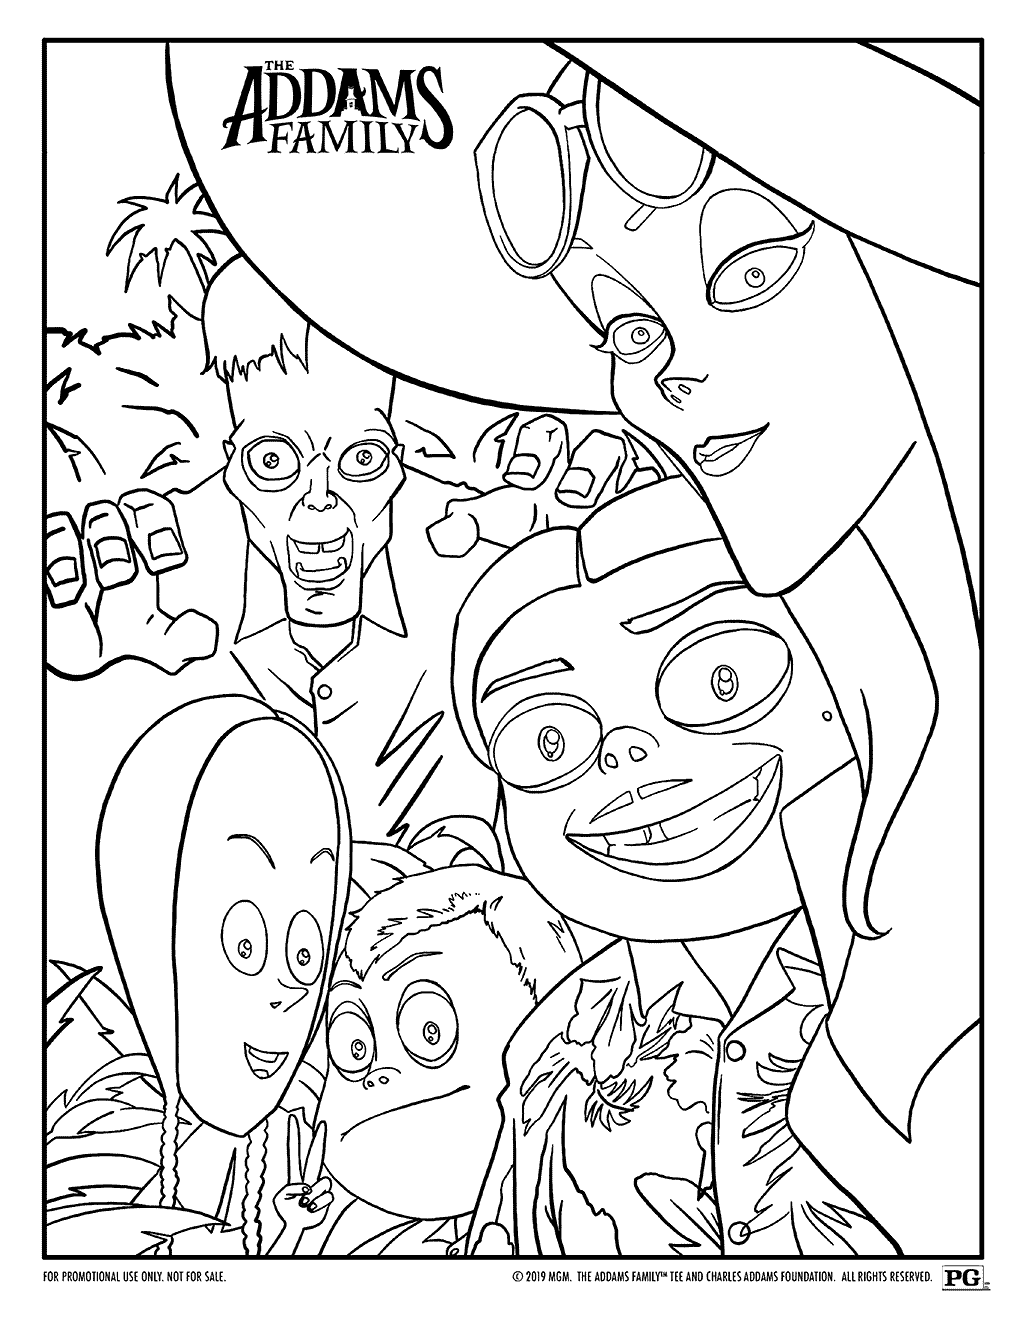 The Addams Family Coloring Pages: A Timeless Icon of Gothic Culture - Free The Addams Family Coloring Pages